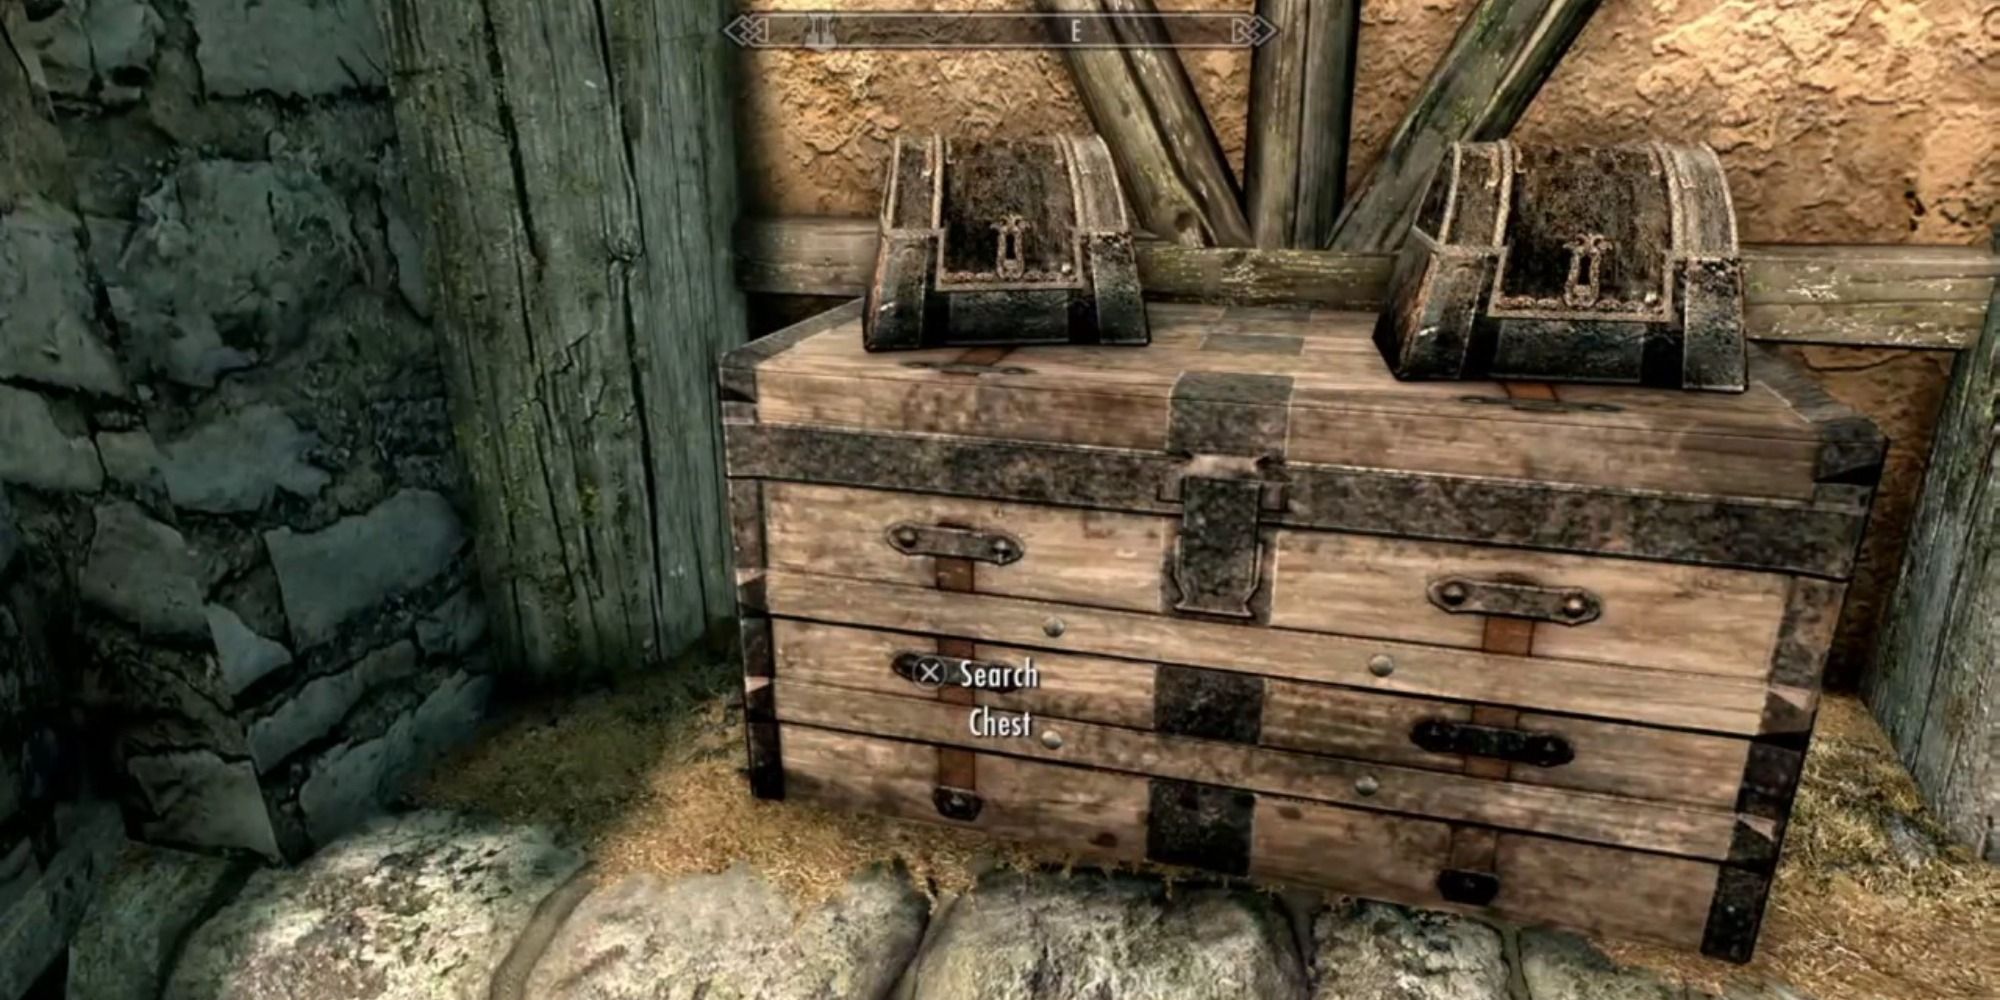 A drawer with two chests sitting on top of it